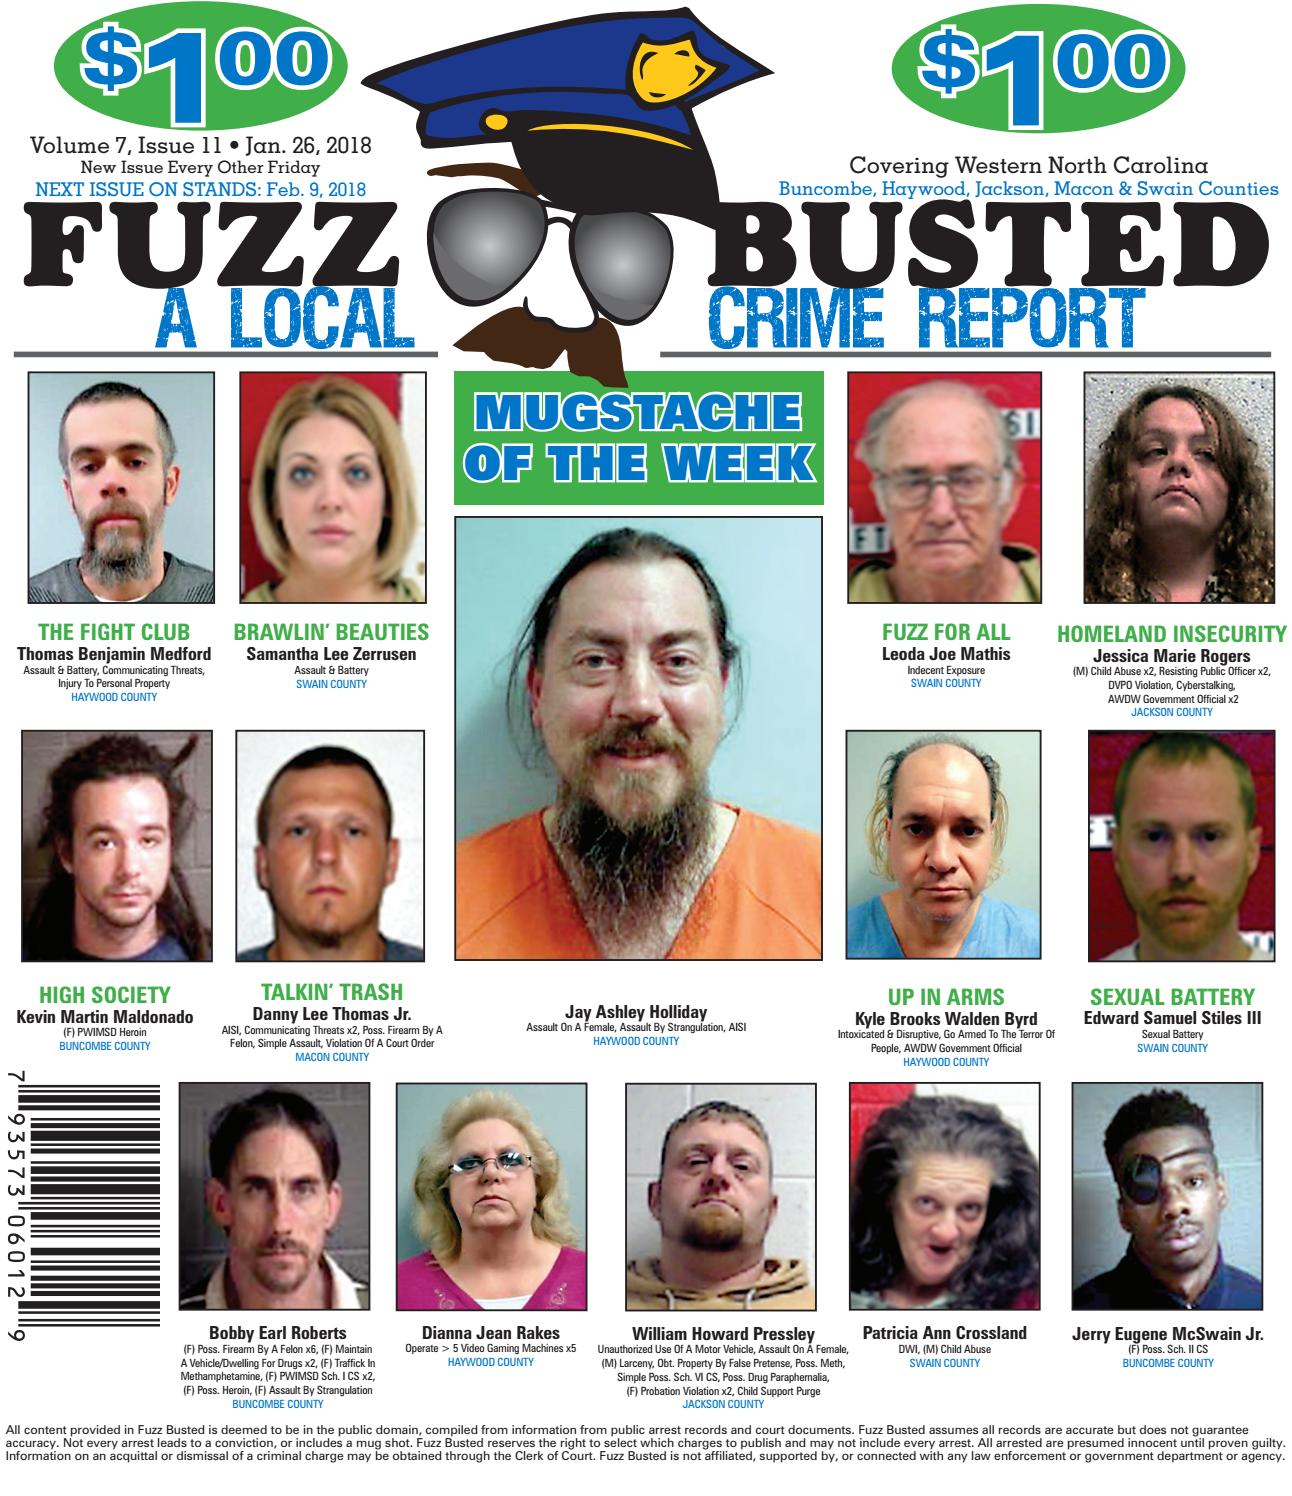 Volume 7 Issue 11 • January 26, 2018 by Fuzz Busted Issuu